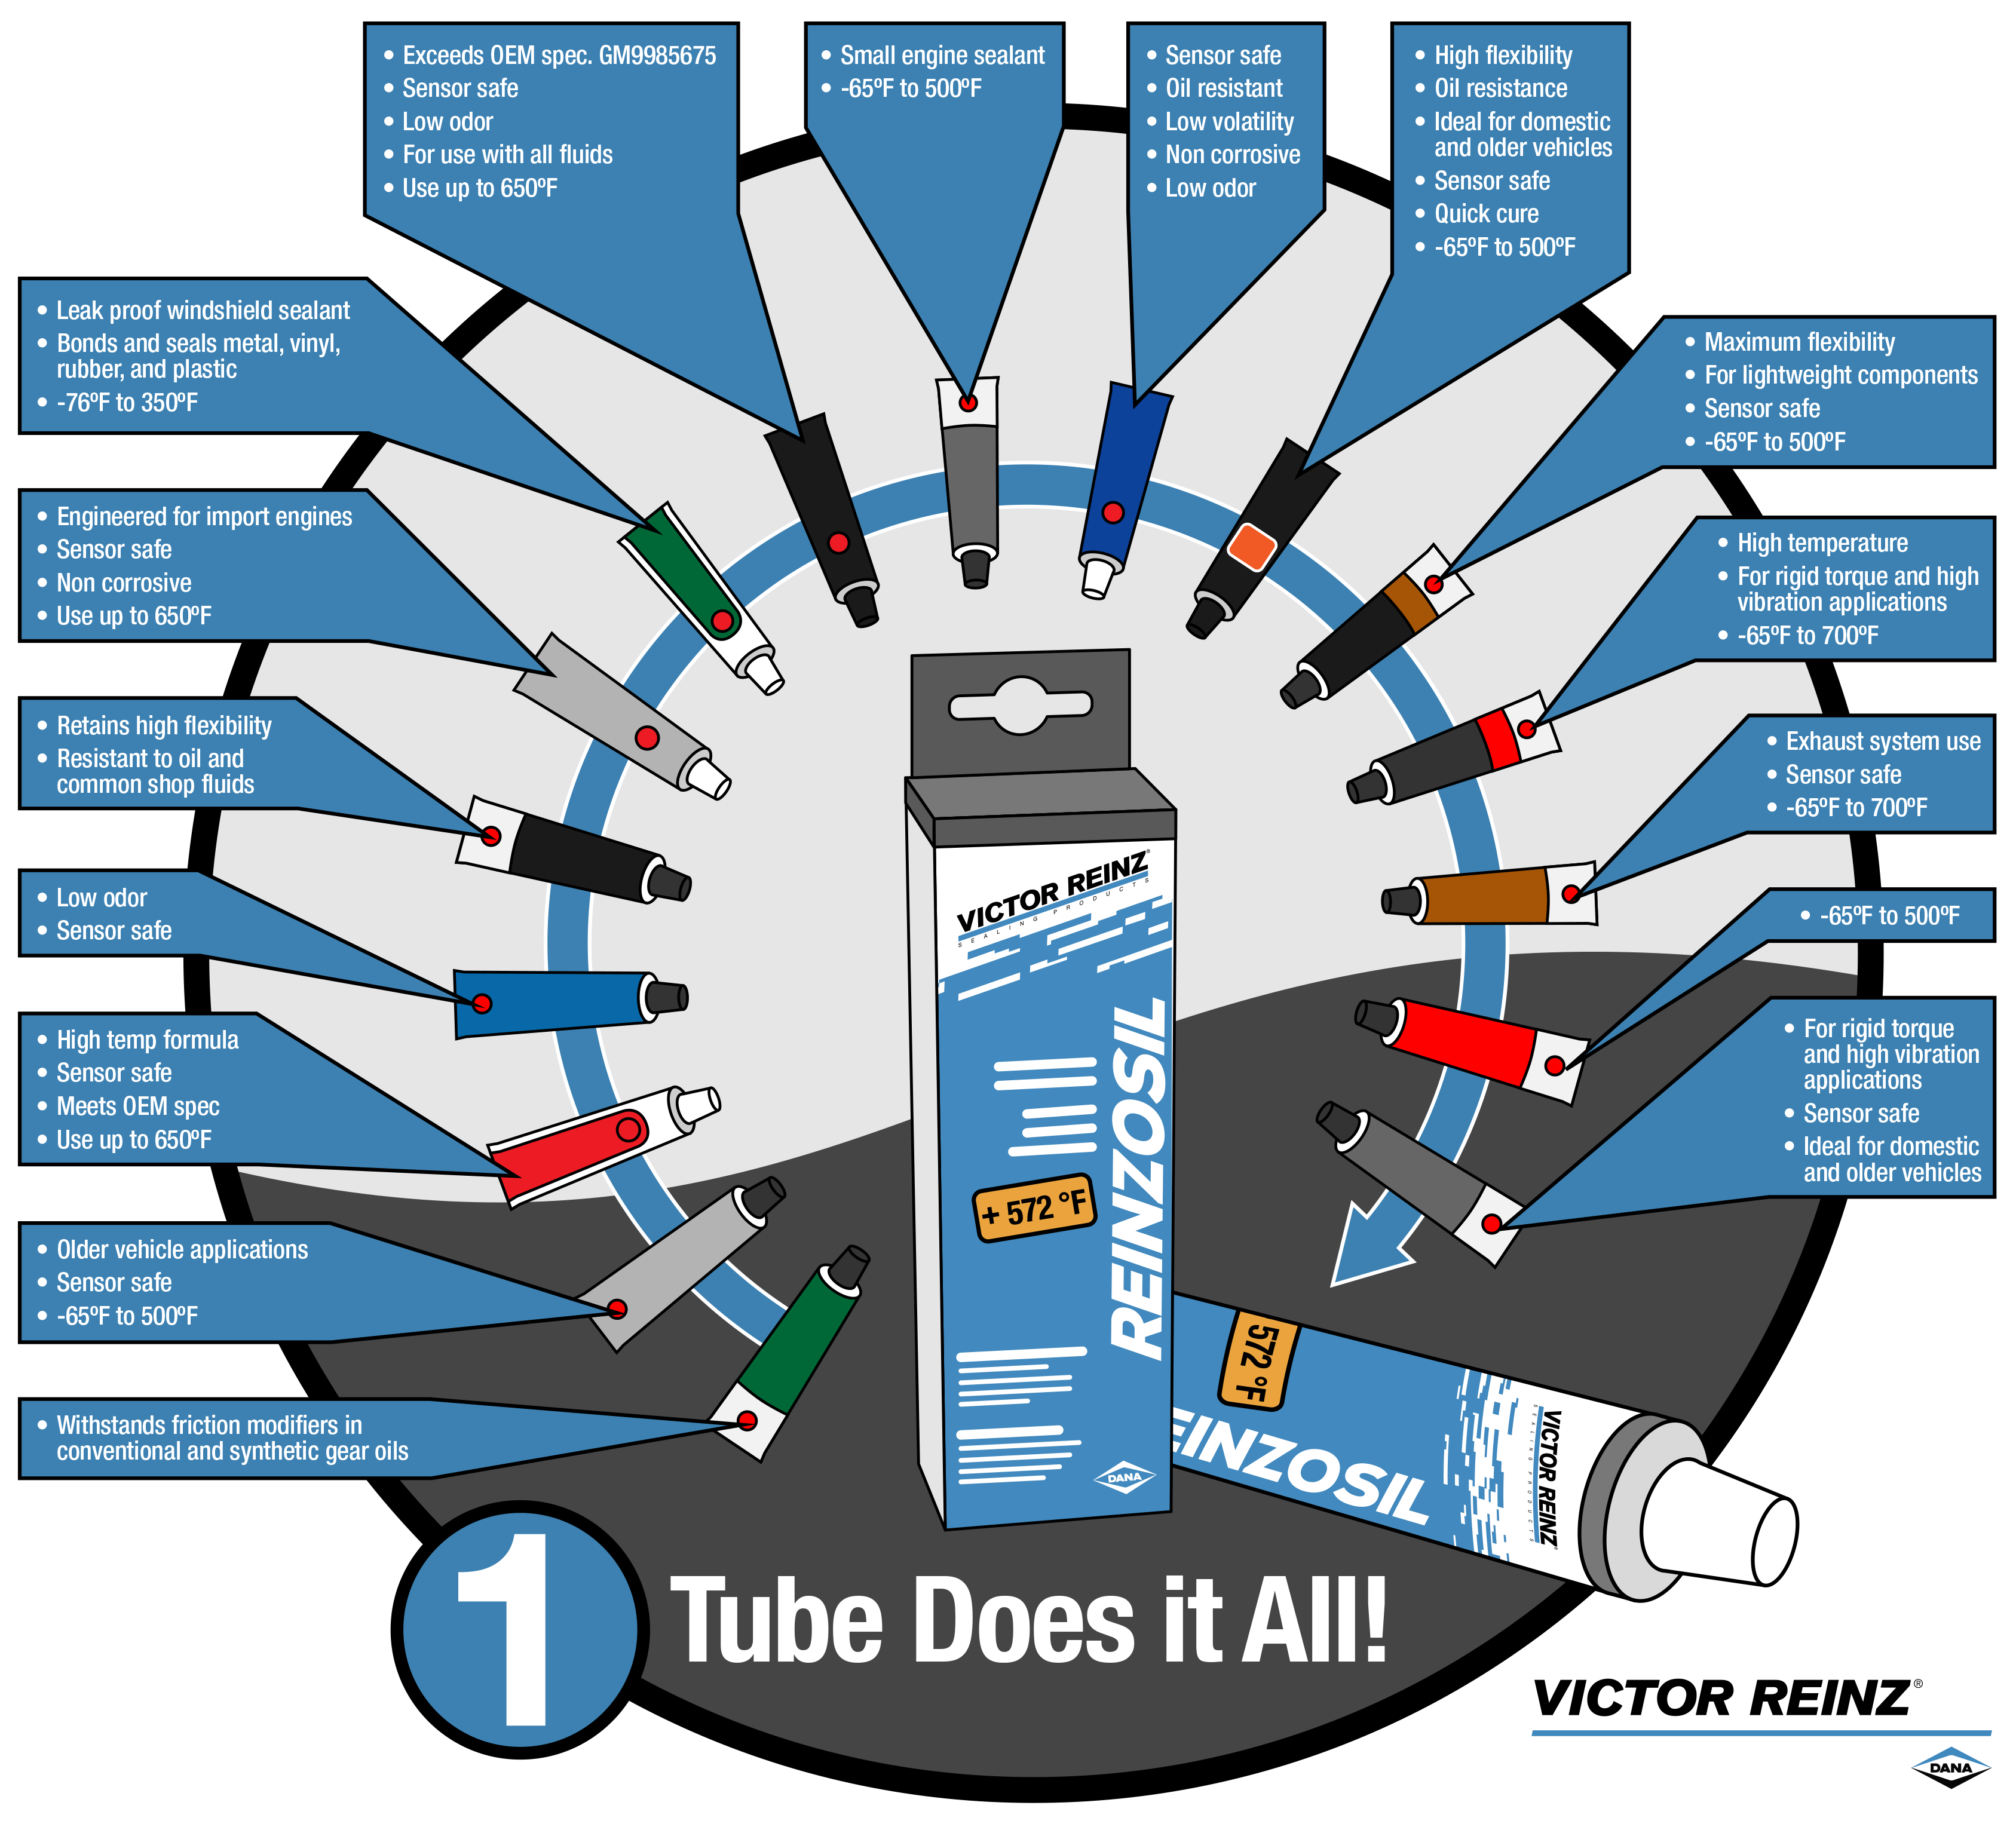 1 Tube Does it All!